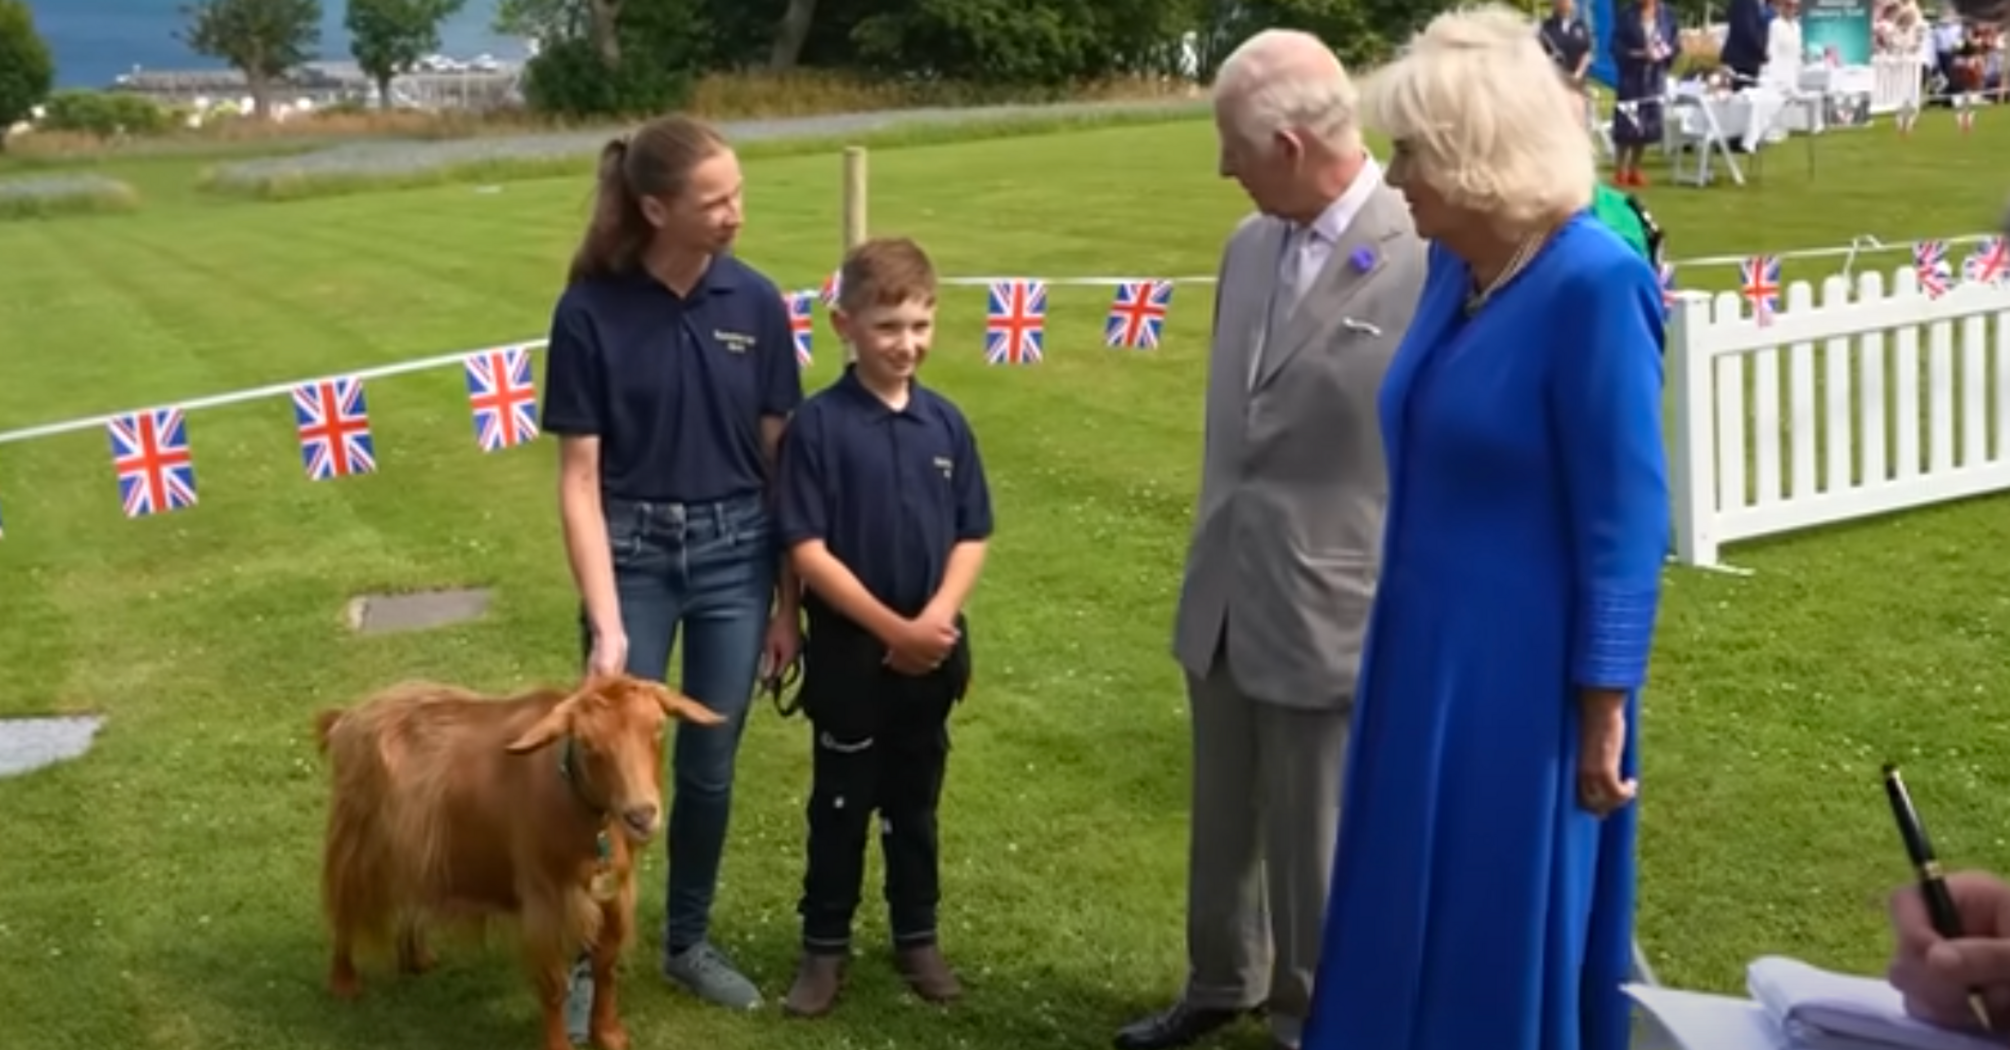 Rare golden goat breed receives royal title from King Charles III